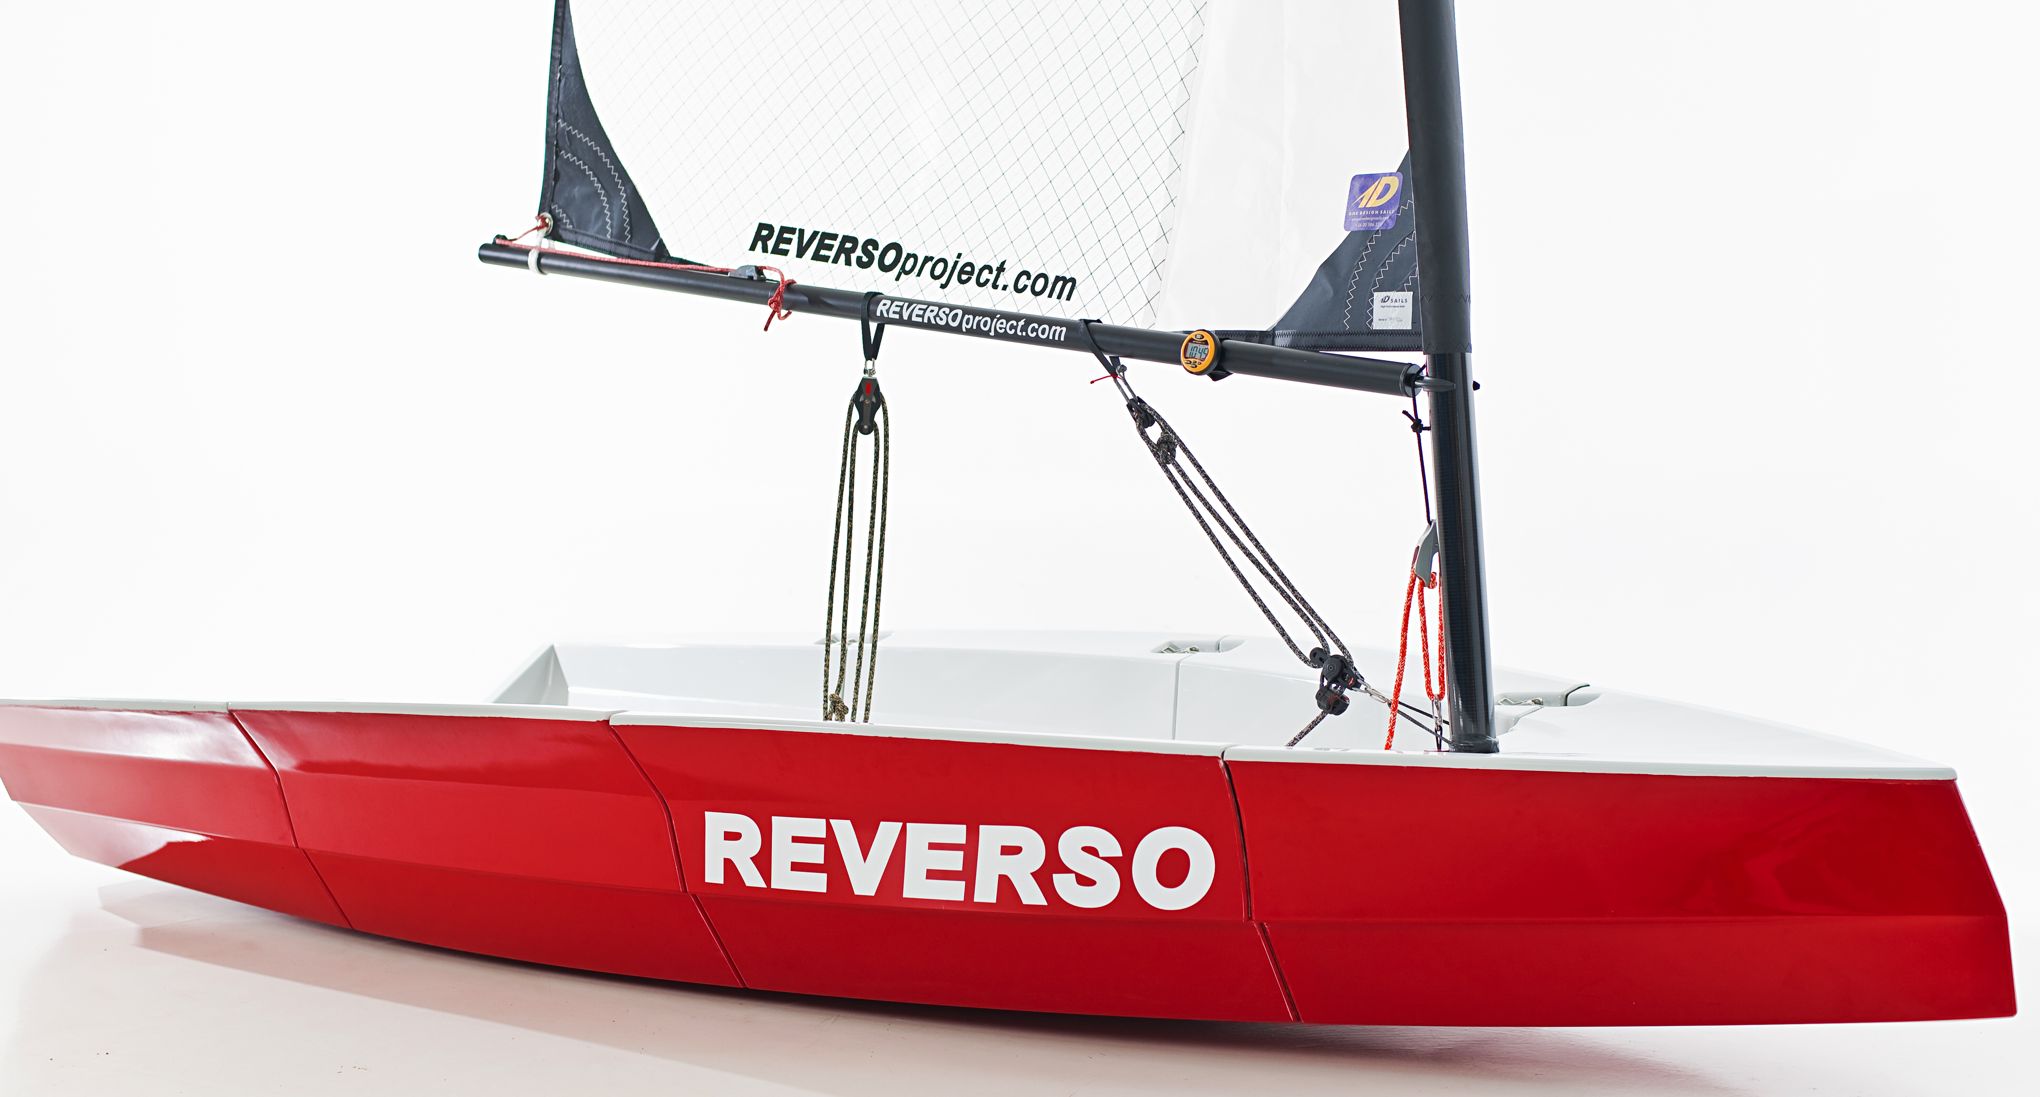 360 VR Virtual Tours of the REVERSO AIR™